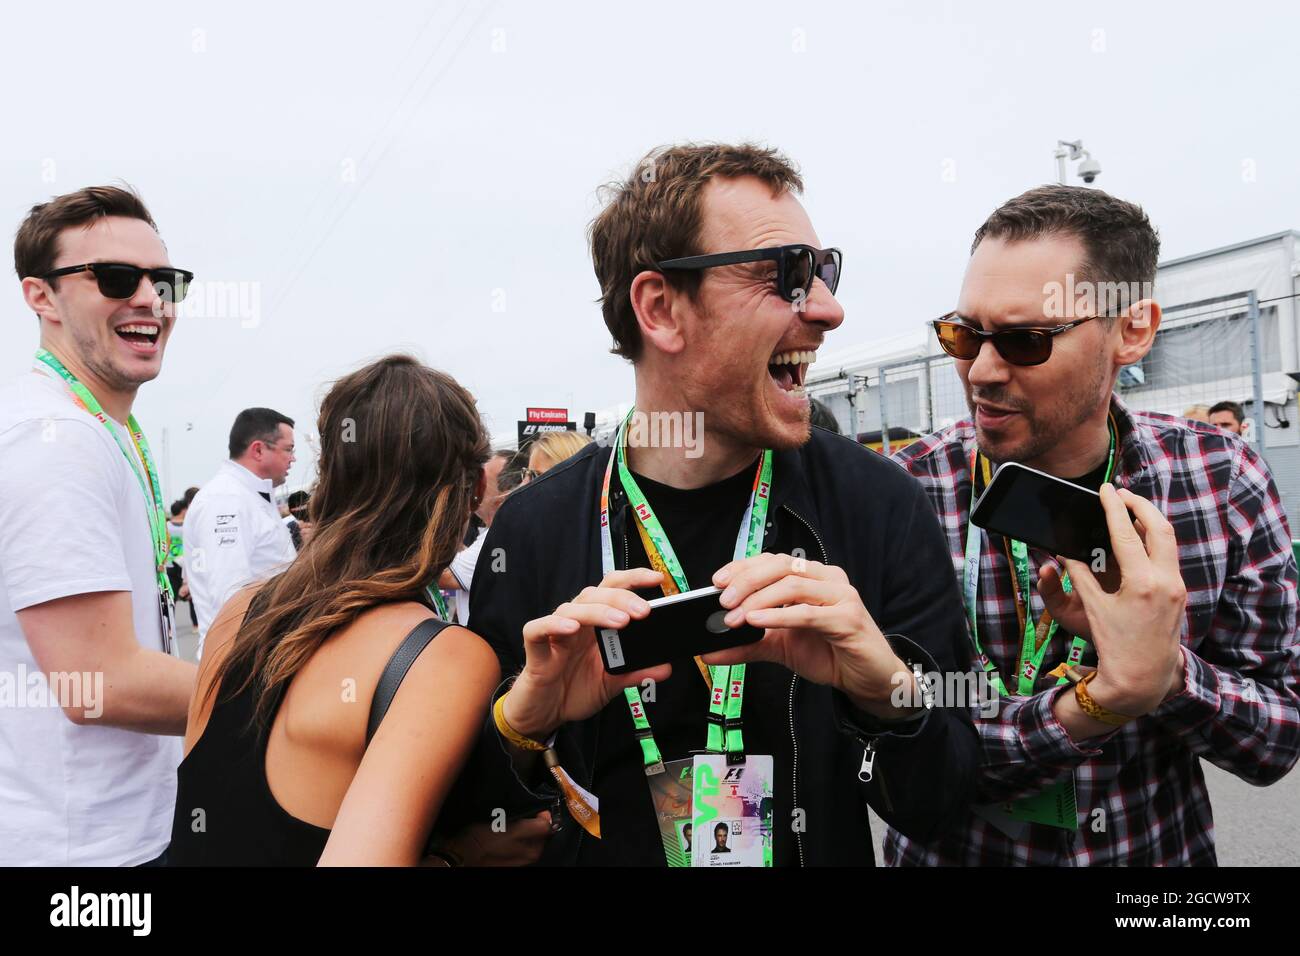 Michael Fassbender (IRE) Actor (Centre) with Bryan Singer (GBR) Film Director (Right) and Nicholas Hoult (GBR) (Left) Actor on the grid. Canadian Grand Prix, Sunday 7th June 2015. Montreal, Canada. Stock Photo